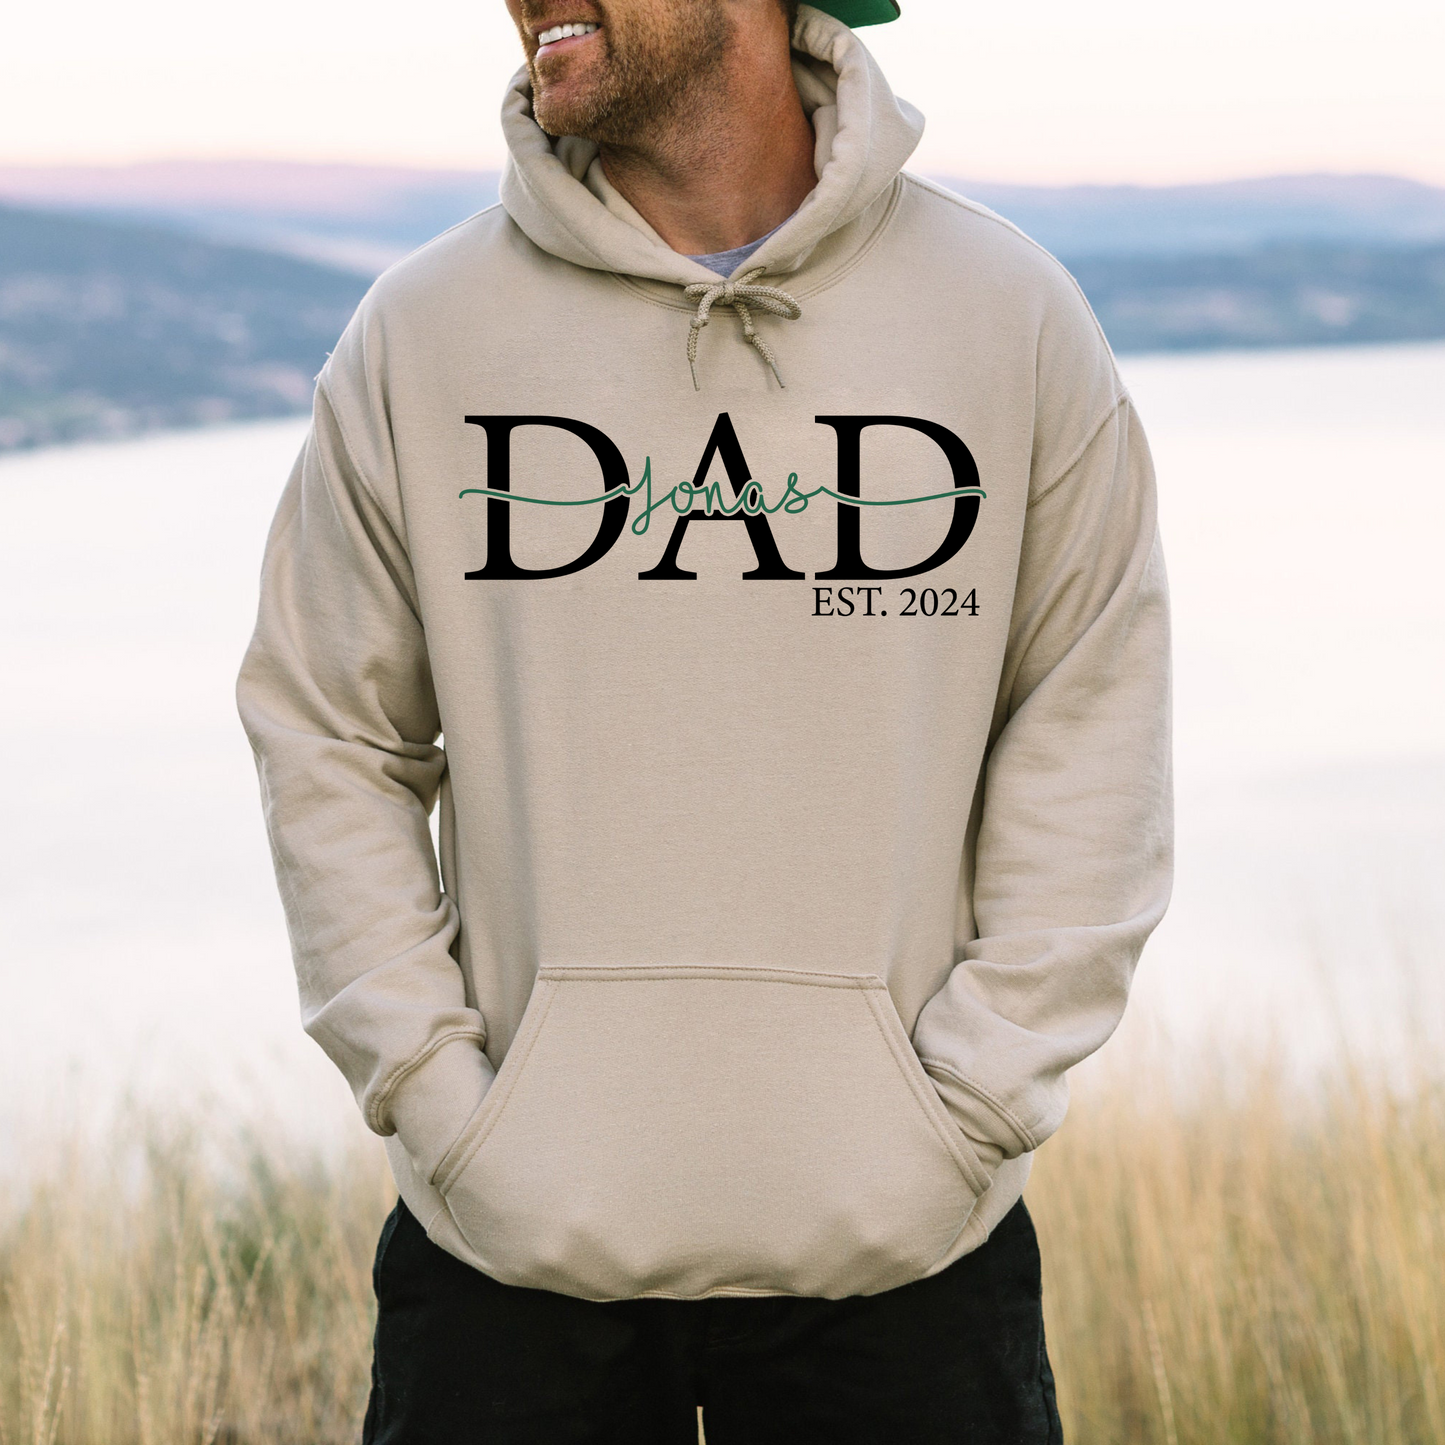 Personalized Dad Shirt with Children's Names - Father's Day Gift